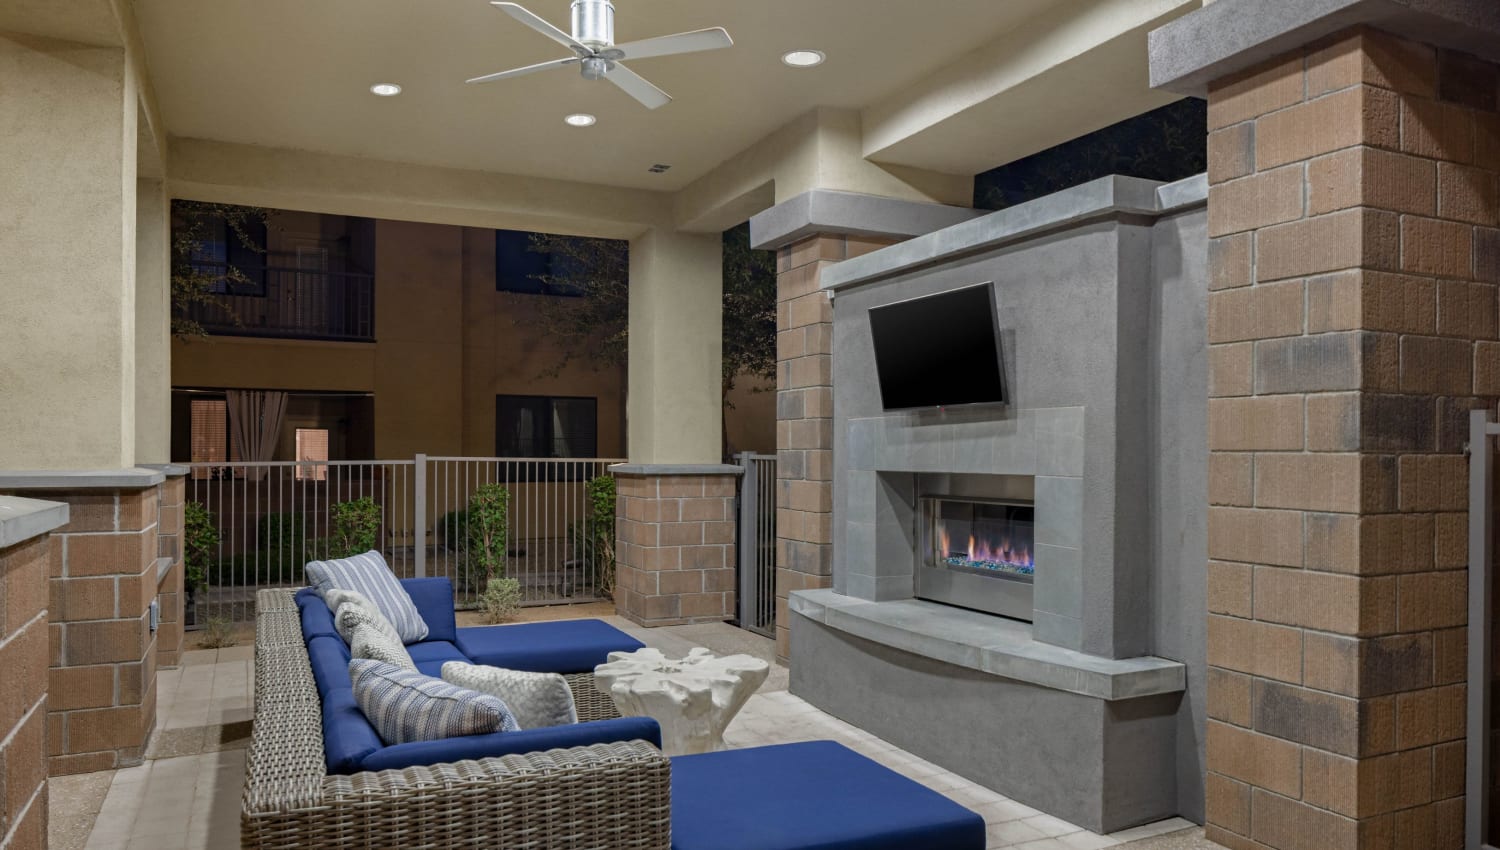 Outdoor couches with a TV and fireplace at Cadia Crossing in Gilbert, Arizona